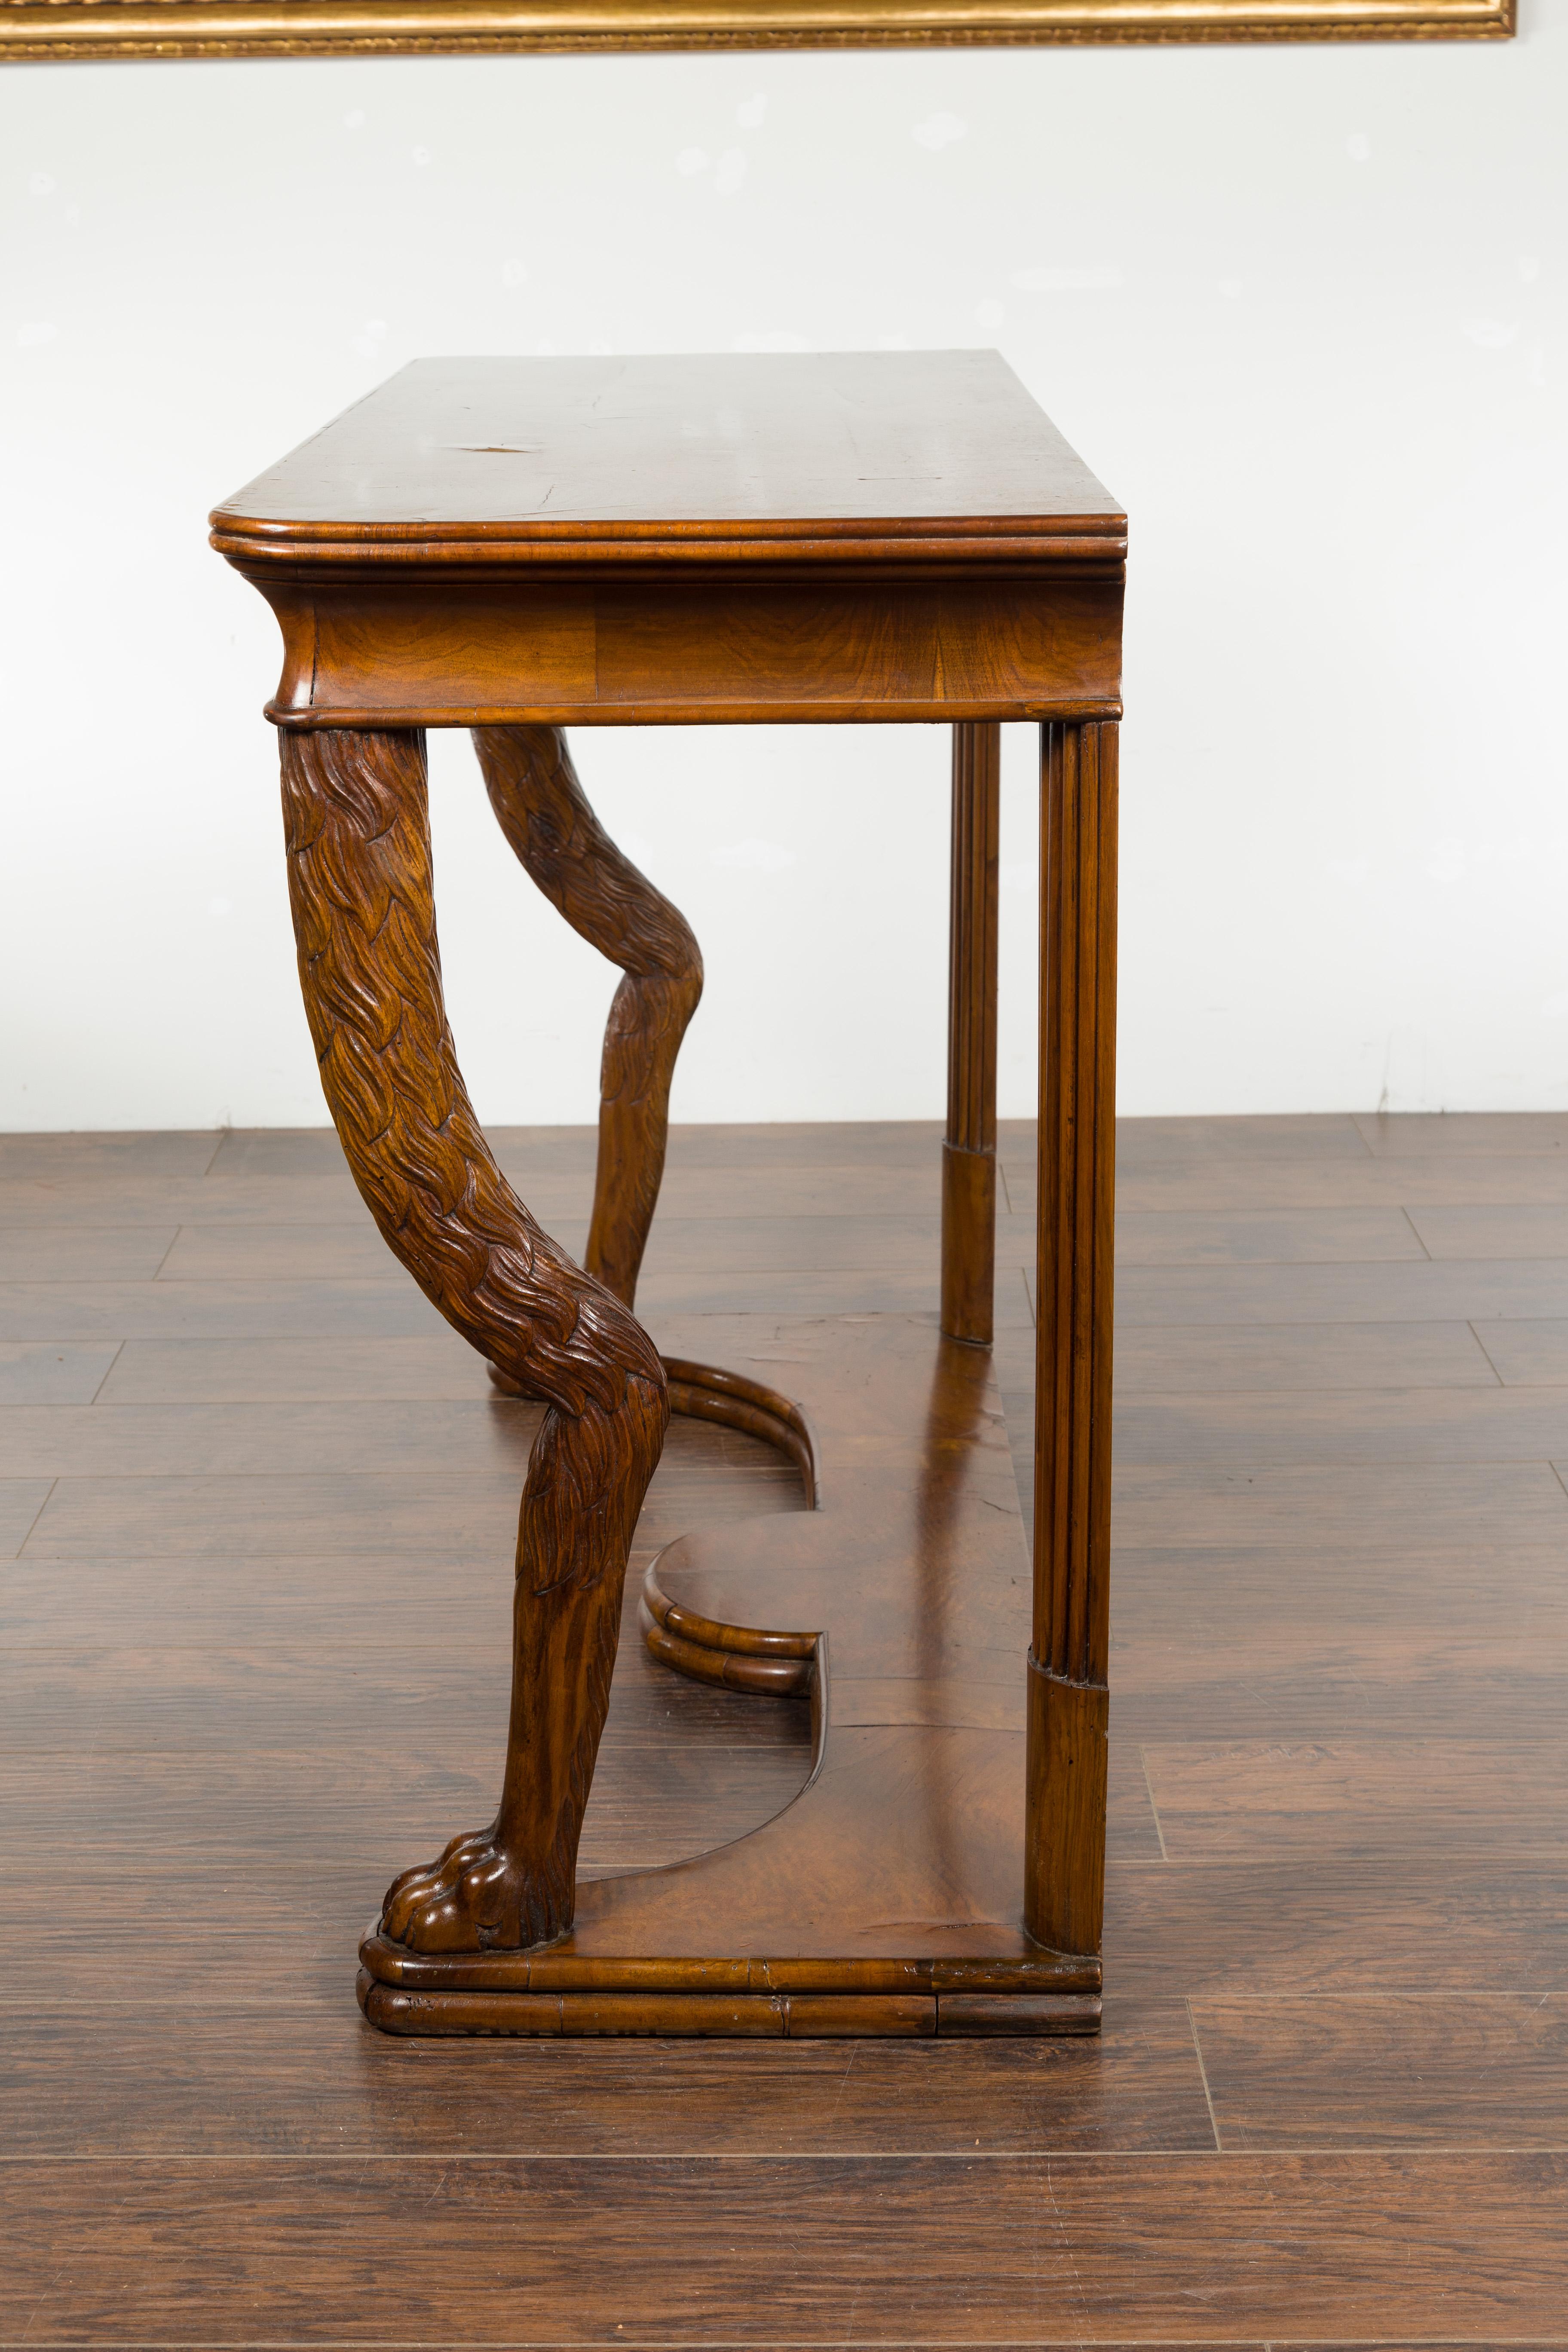 Biedermeier Period 1840s Walnut Console Table with Fur Style Legs and Paw Feet 15